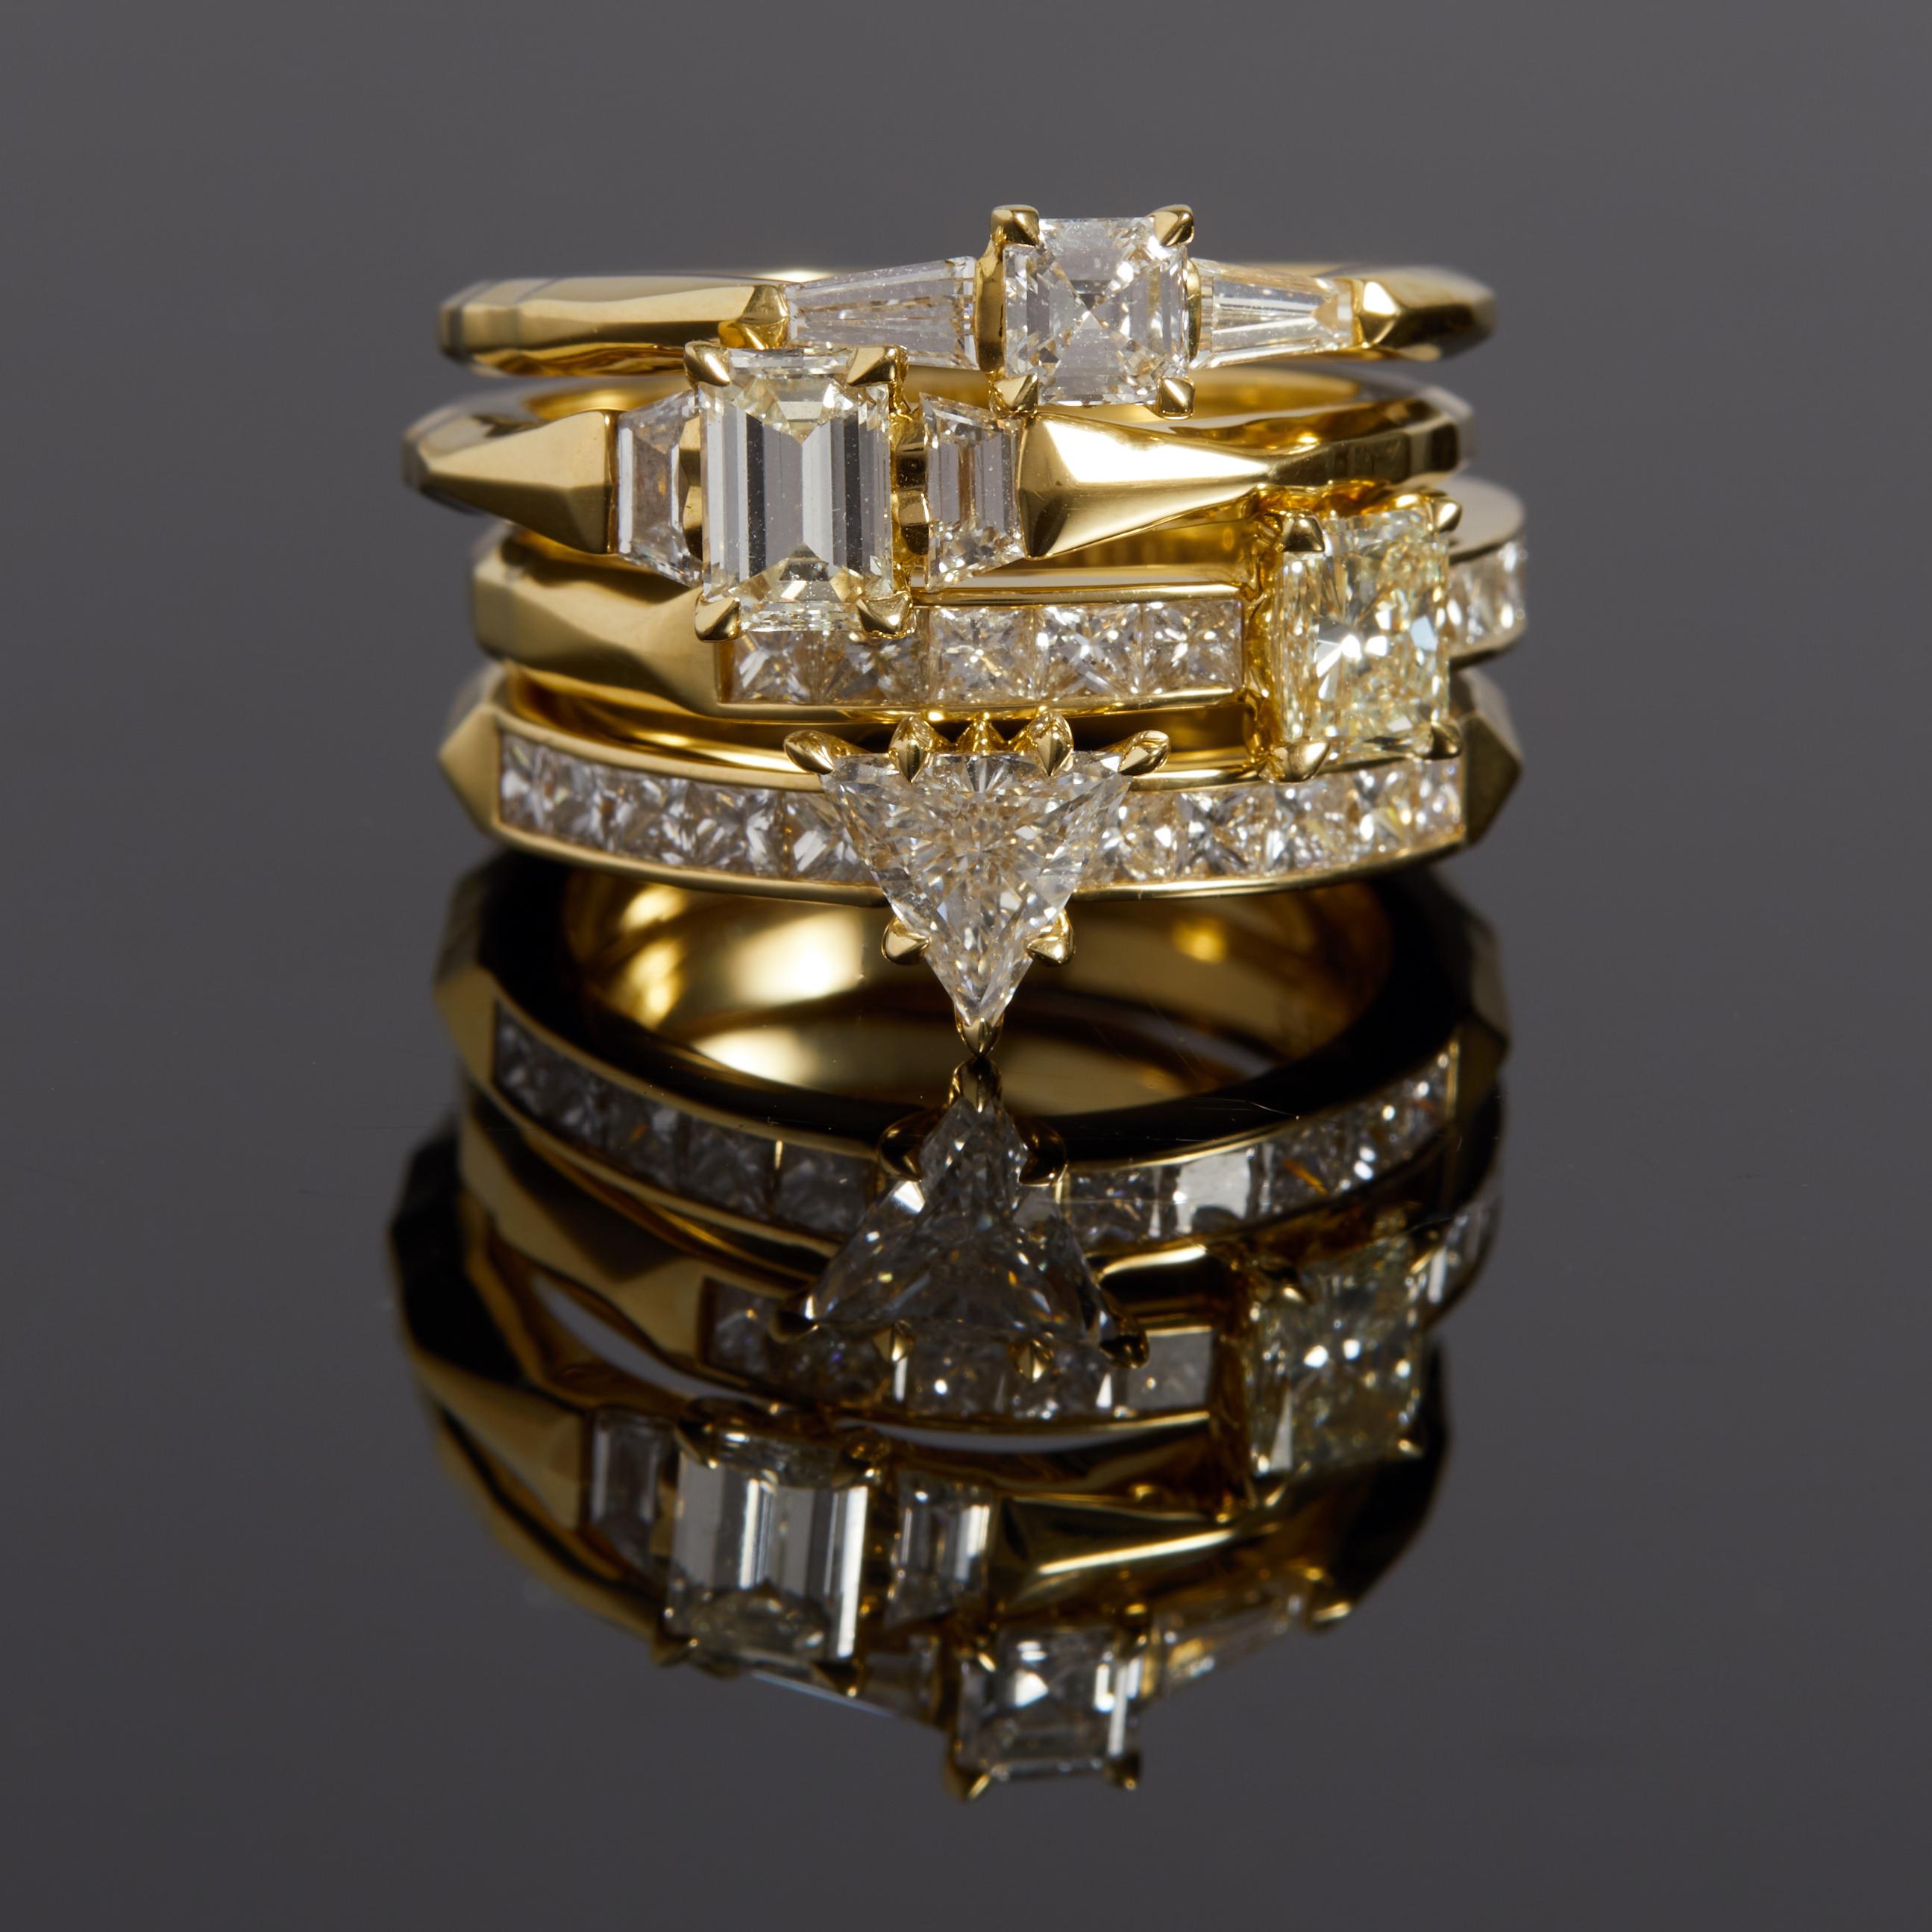 Past, Present for Future

18ct yellow gold and diamond ring. Centre Stone is  4 x 2.2 x 2.2mm 0.2ct diamond with two 3.7 x 3.6 mm 0.3ct tapered baguette Diamonds on the shoulders.